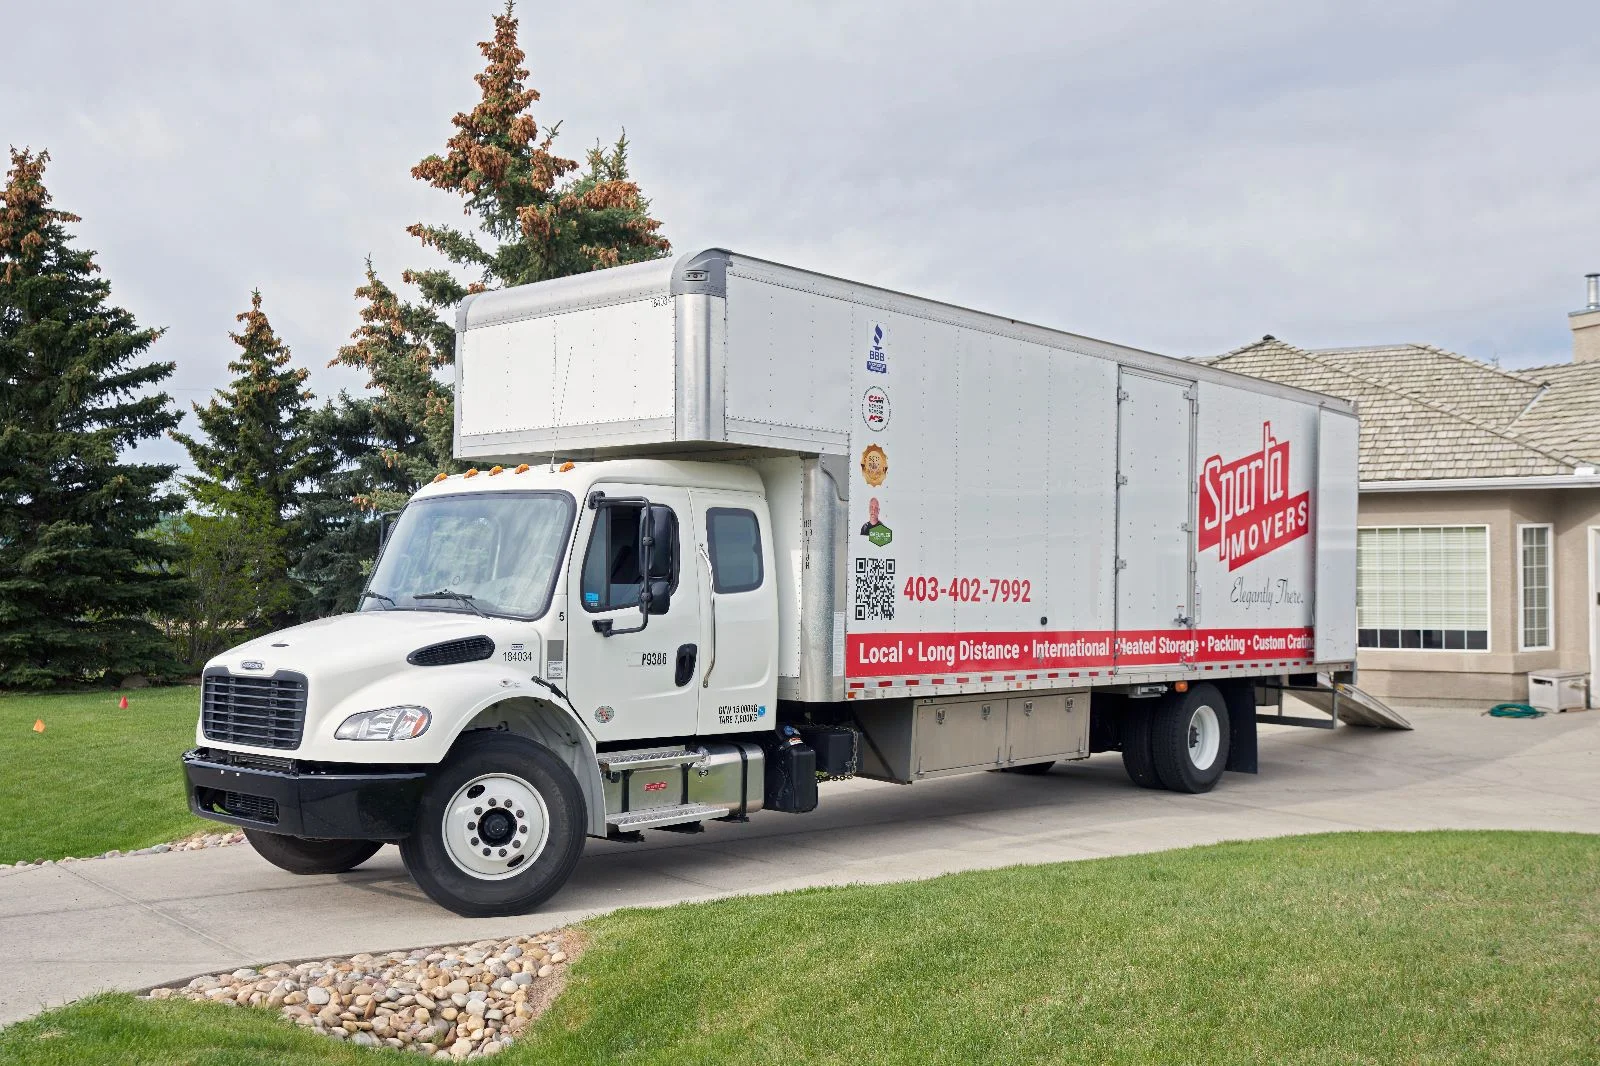 LONG DISTANCE MOVING SERVICES IN CANADA